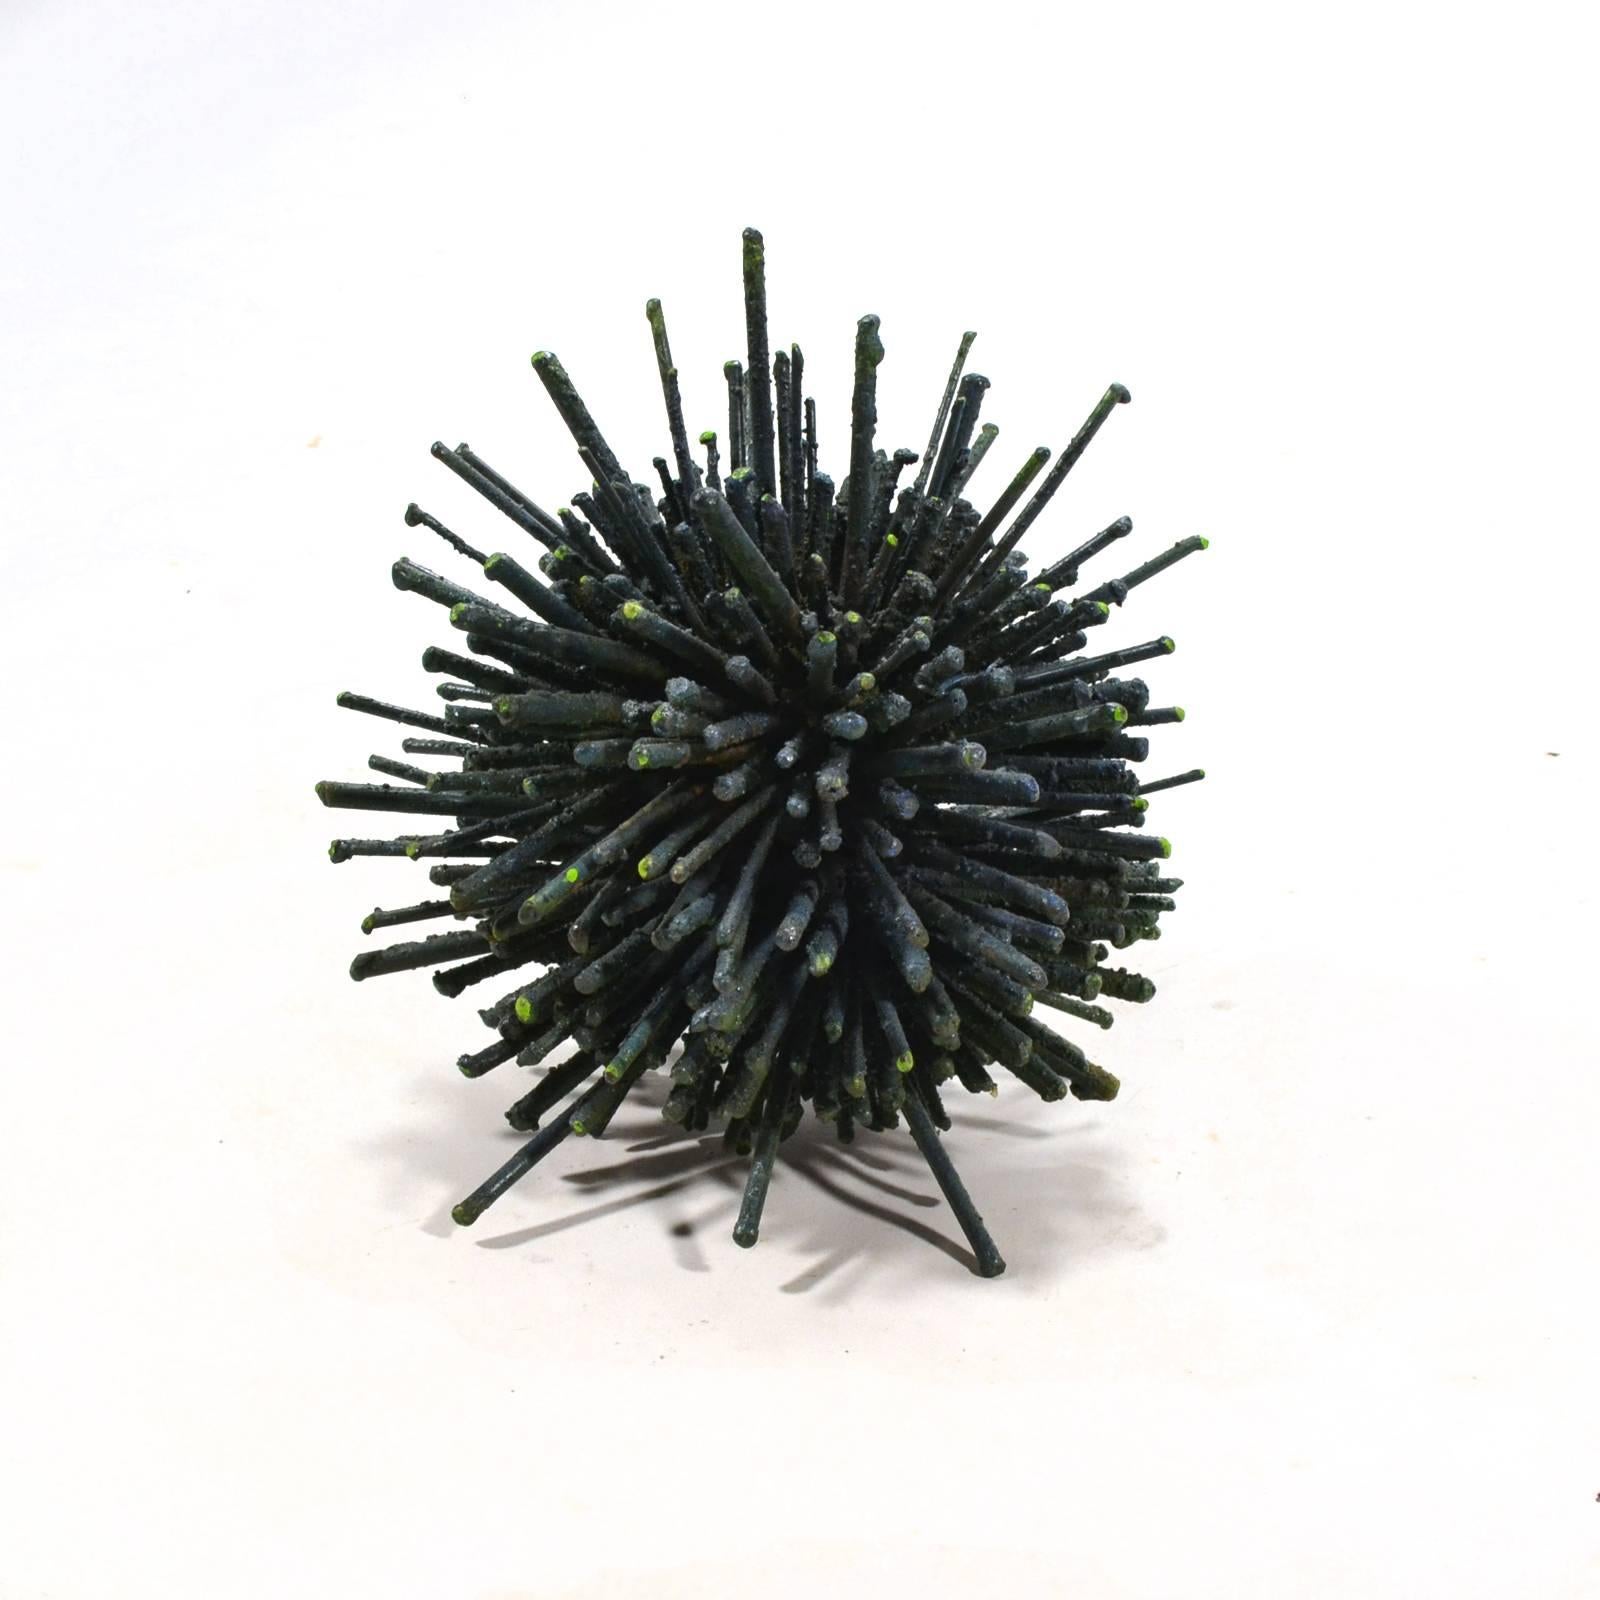 A wonderful and whimsical piece by sculptor James Bearden, this piece is composed of rods arranged in a dense burst reminiscent of the dandelion sculptures by Harry Bertoia. The sculpture has a wonderful composition, great texture, and subtle color,